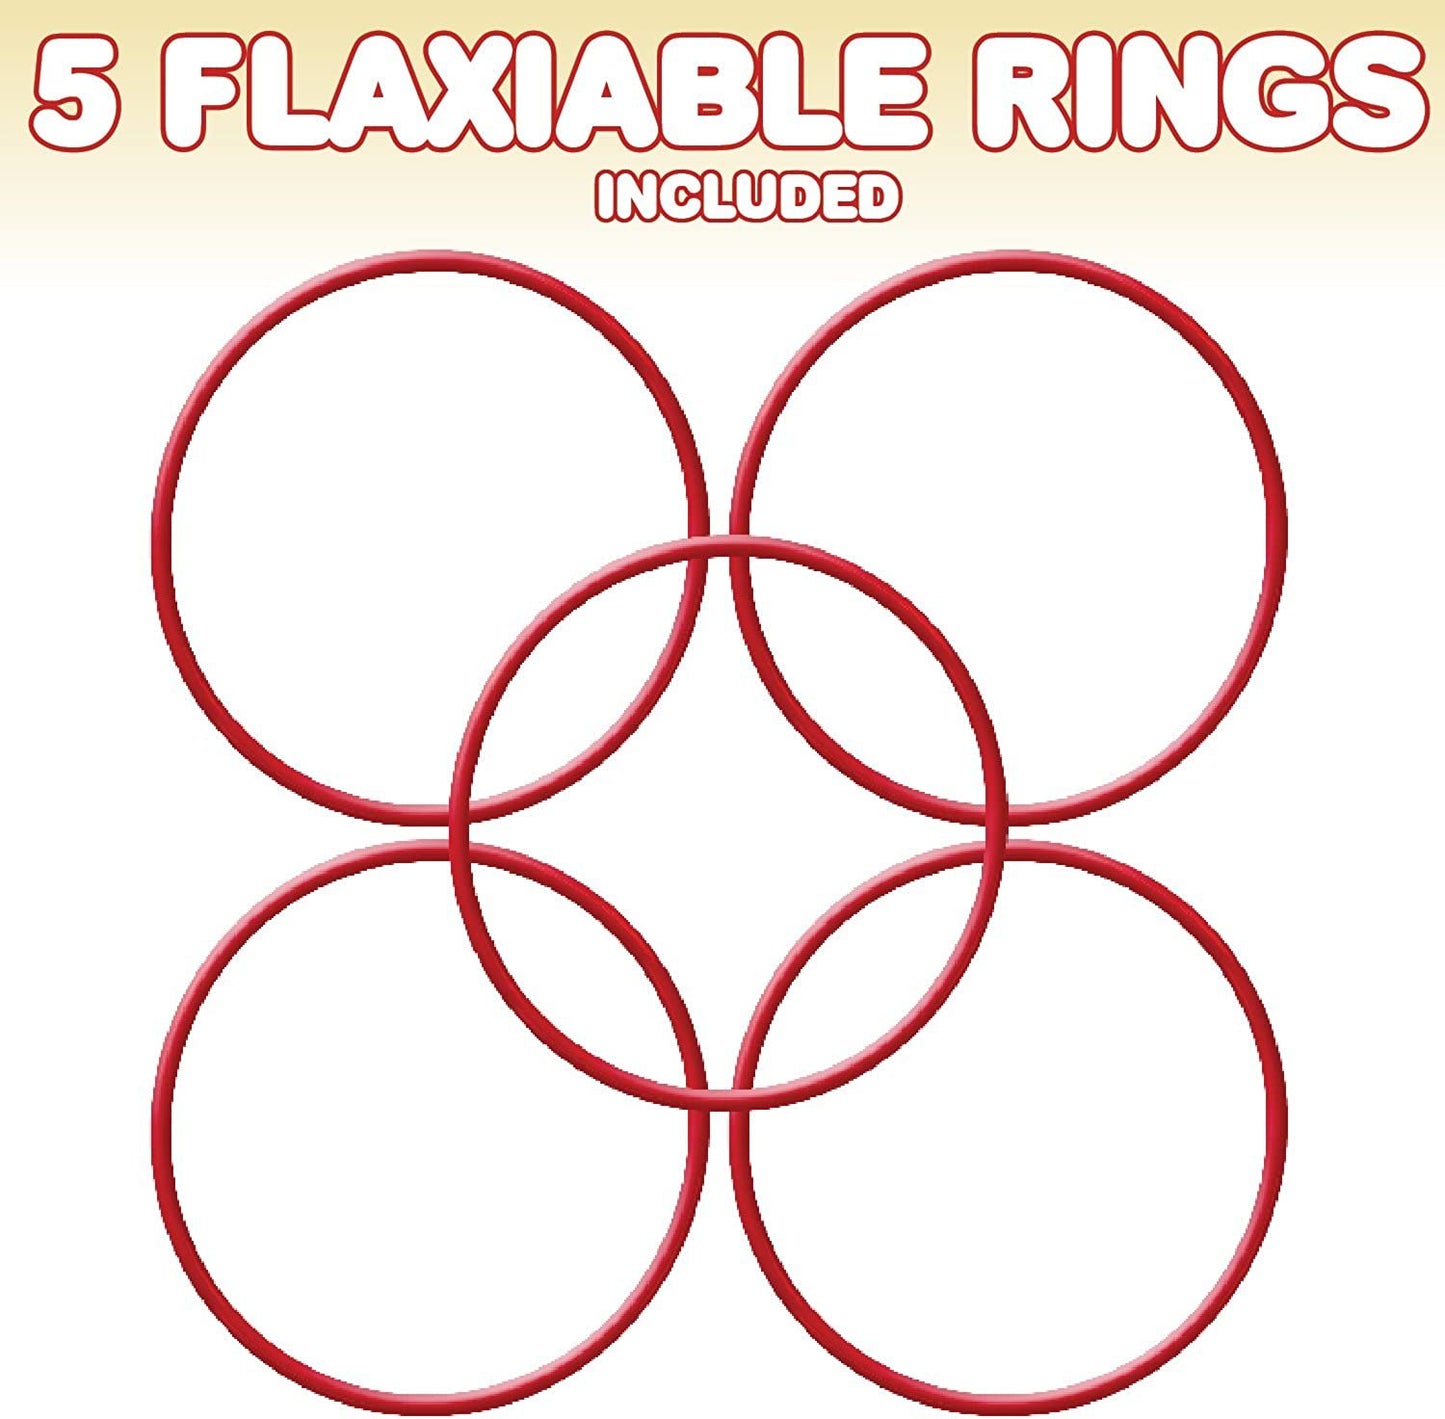 Inflatable Ring Toss Game by Gamie - Super Fun Outdoor Games for Kids & Adults - 5 15 Inch Tall Inflate Bases, 5 Flexible Rings and 5 Sturdy Rings - Best Birthday Party Activity Boys and Girls